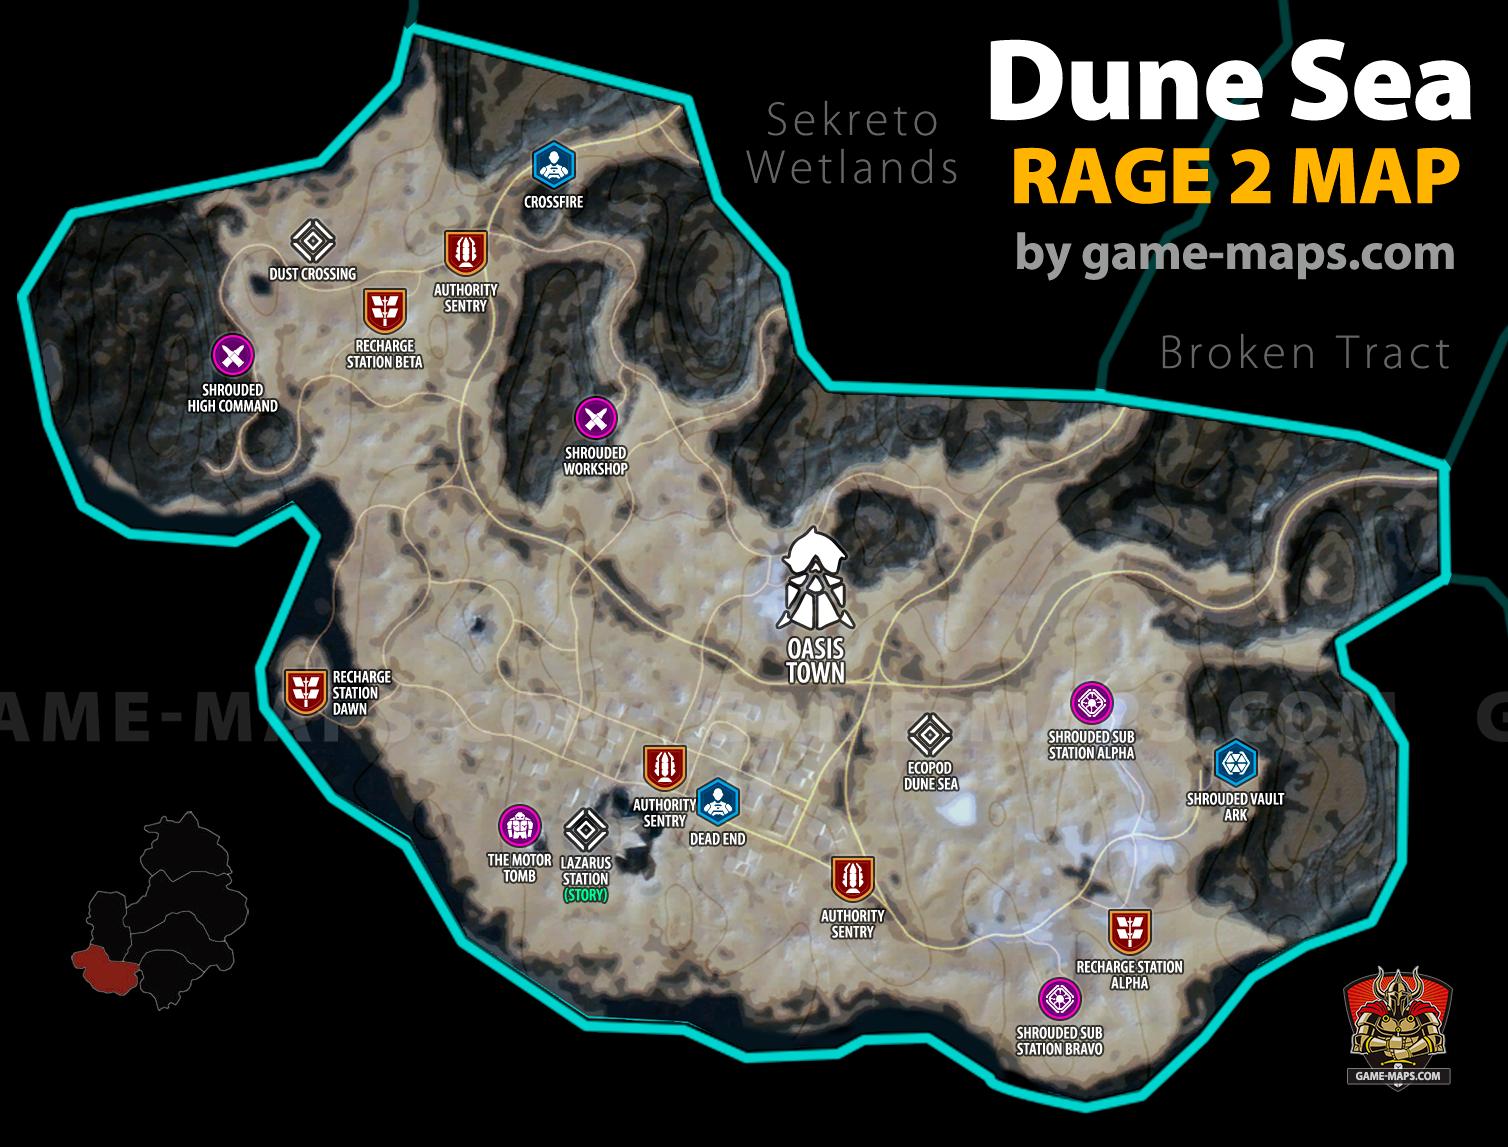 Dune Sea - Rage 2 Map with Locations